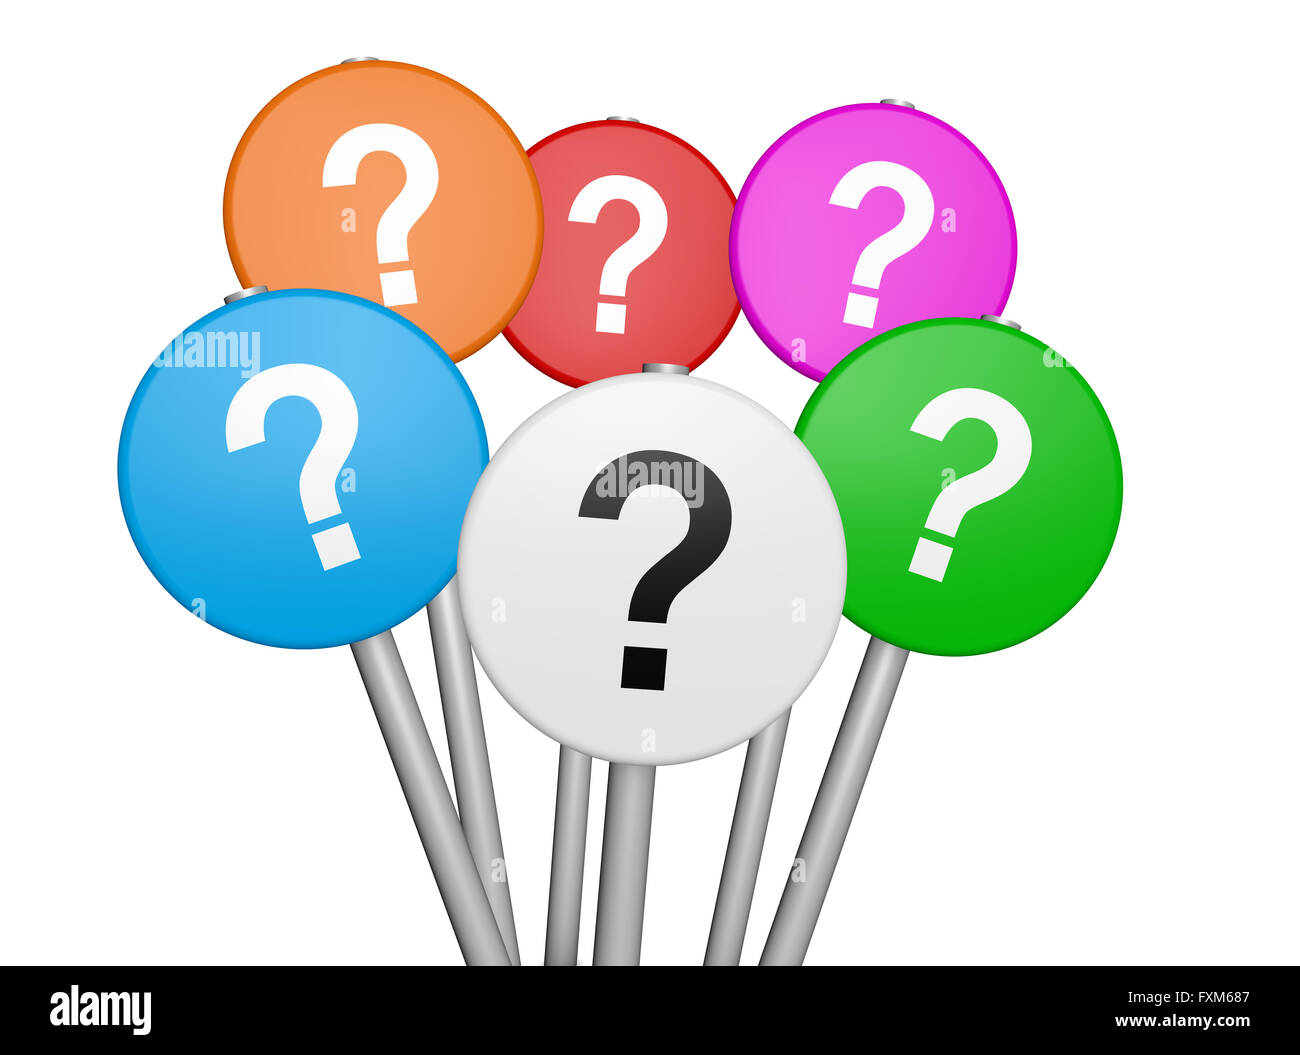 Business and customers questions concept with question mark symbol and icon on colorful sign 3D illustration isolated on white. Stock Photo